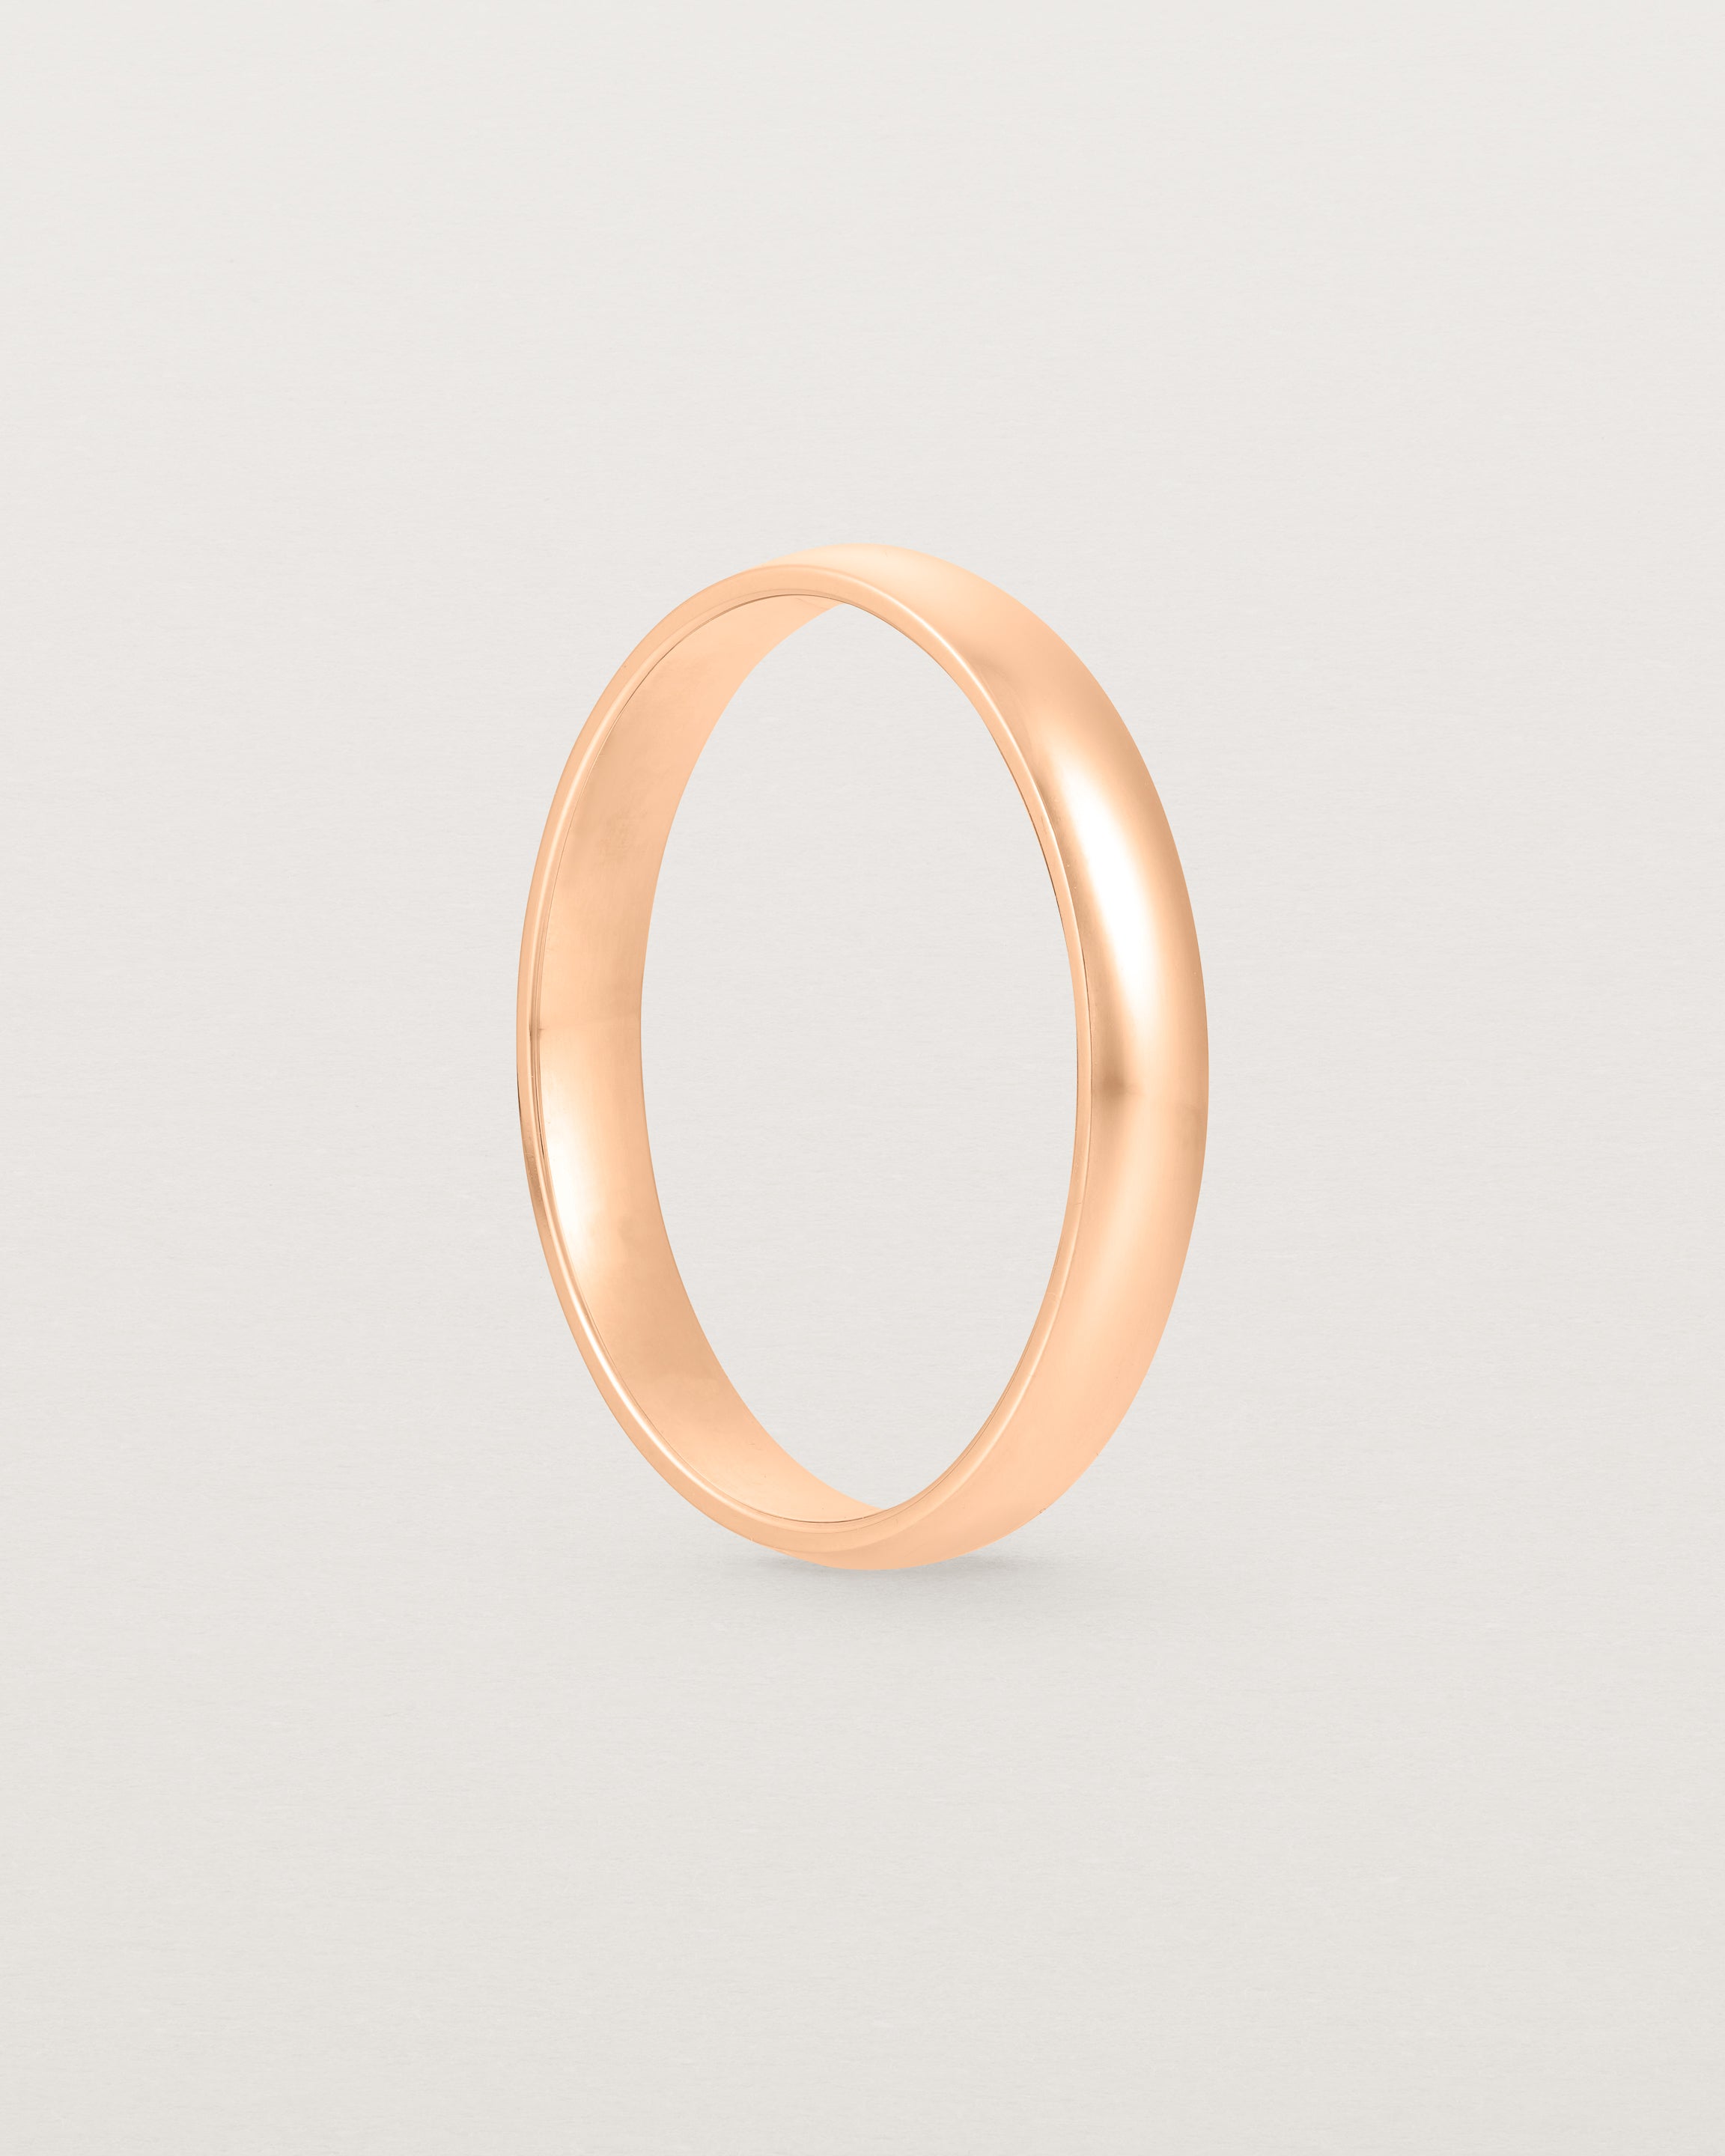 The side view of a 3mm fine, classic wedding band in rose gold.